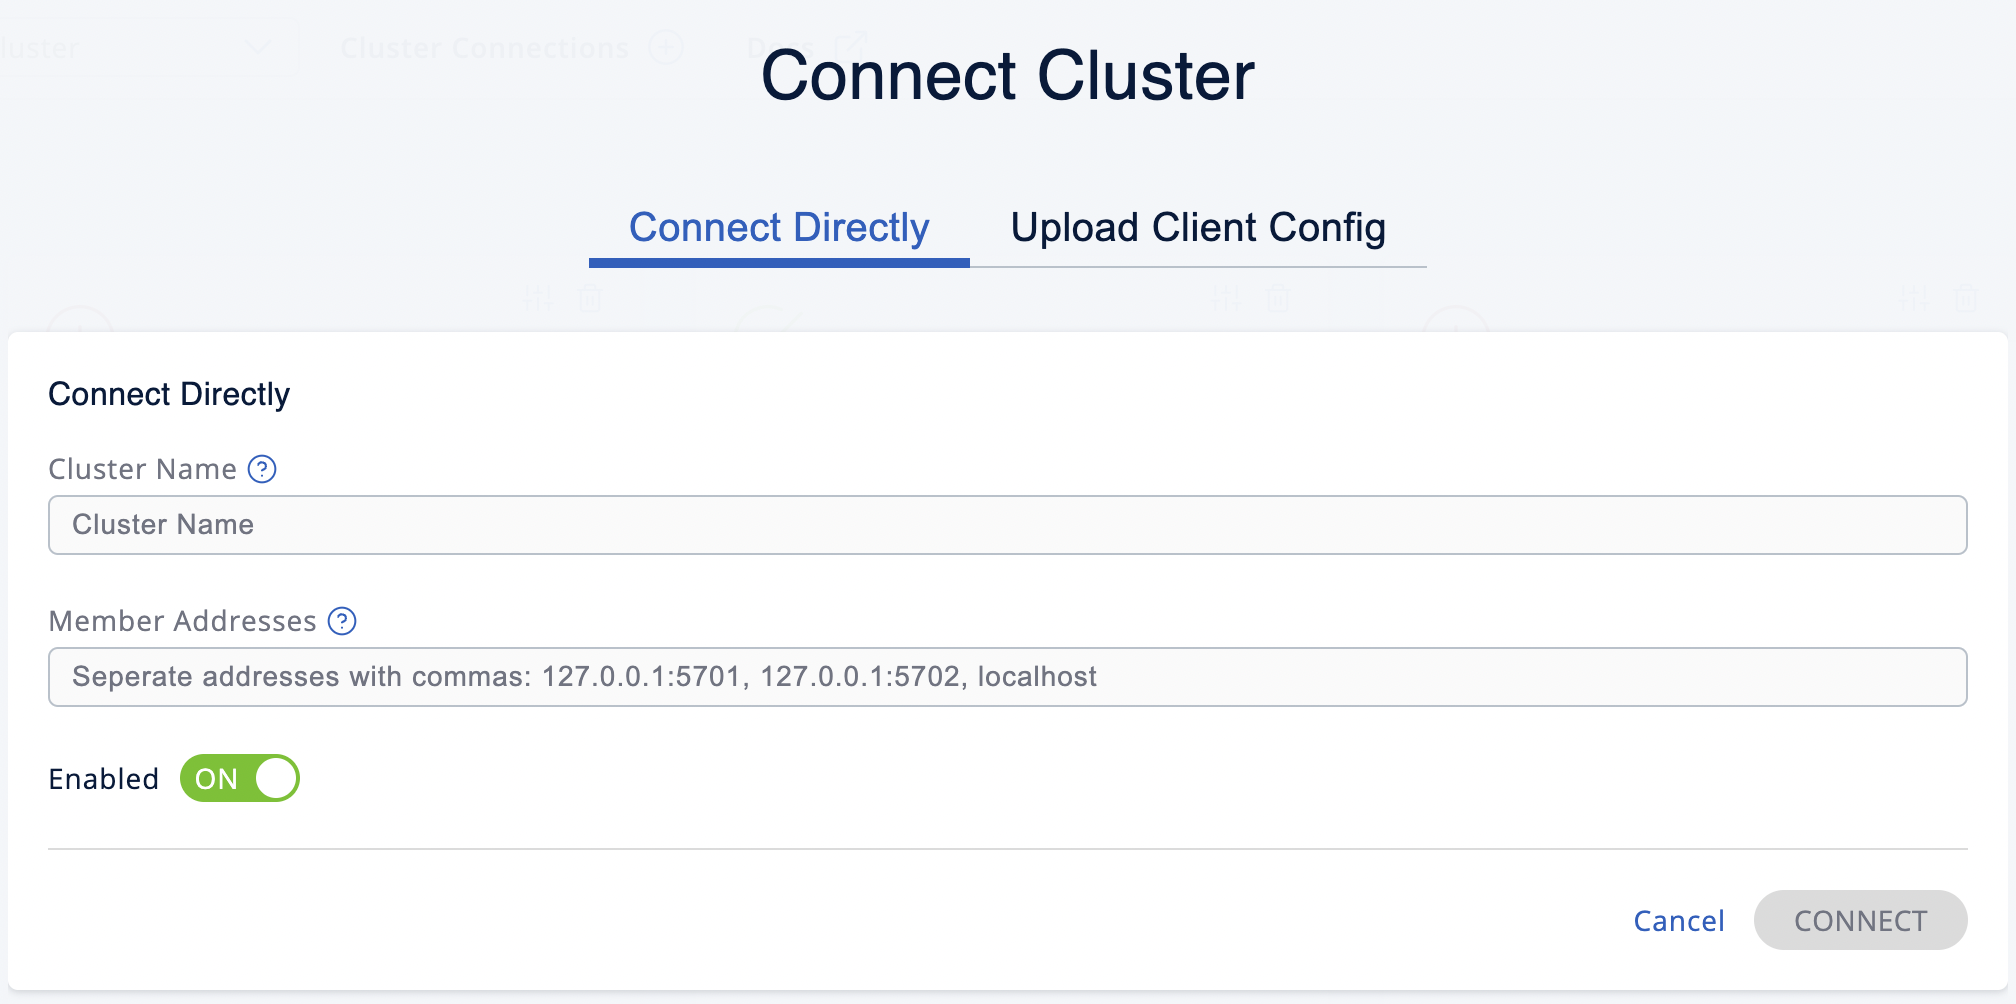 Add New Cluster Configuration